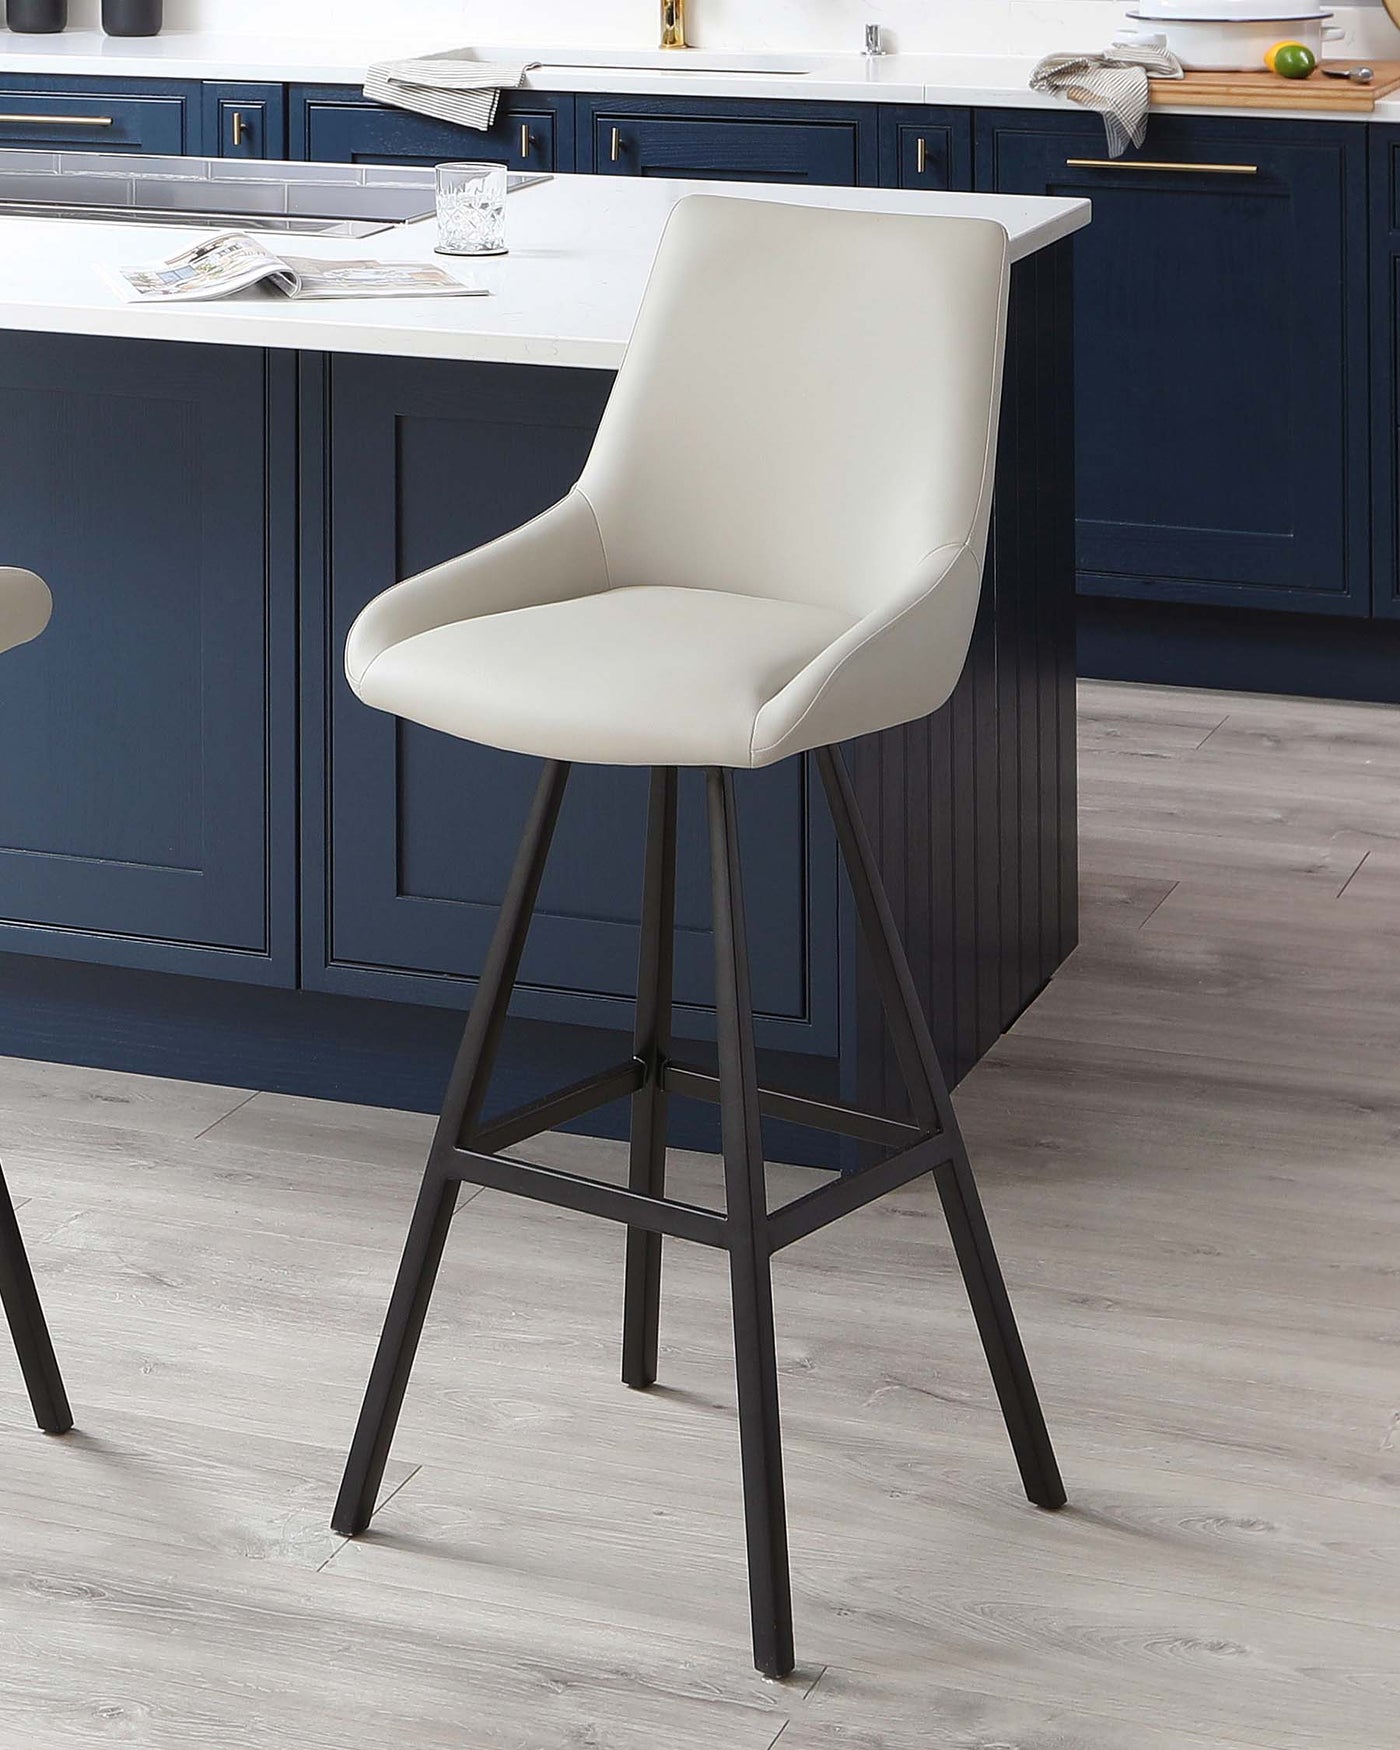 A modern bar stool with a high back and armrests, upholstered in light beige faux leather, set on a tall, angular, black metal base with four legs and supporting footrests. The stool is set against a kitchen island with navy blue cabinetry and a white countertop.